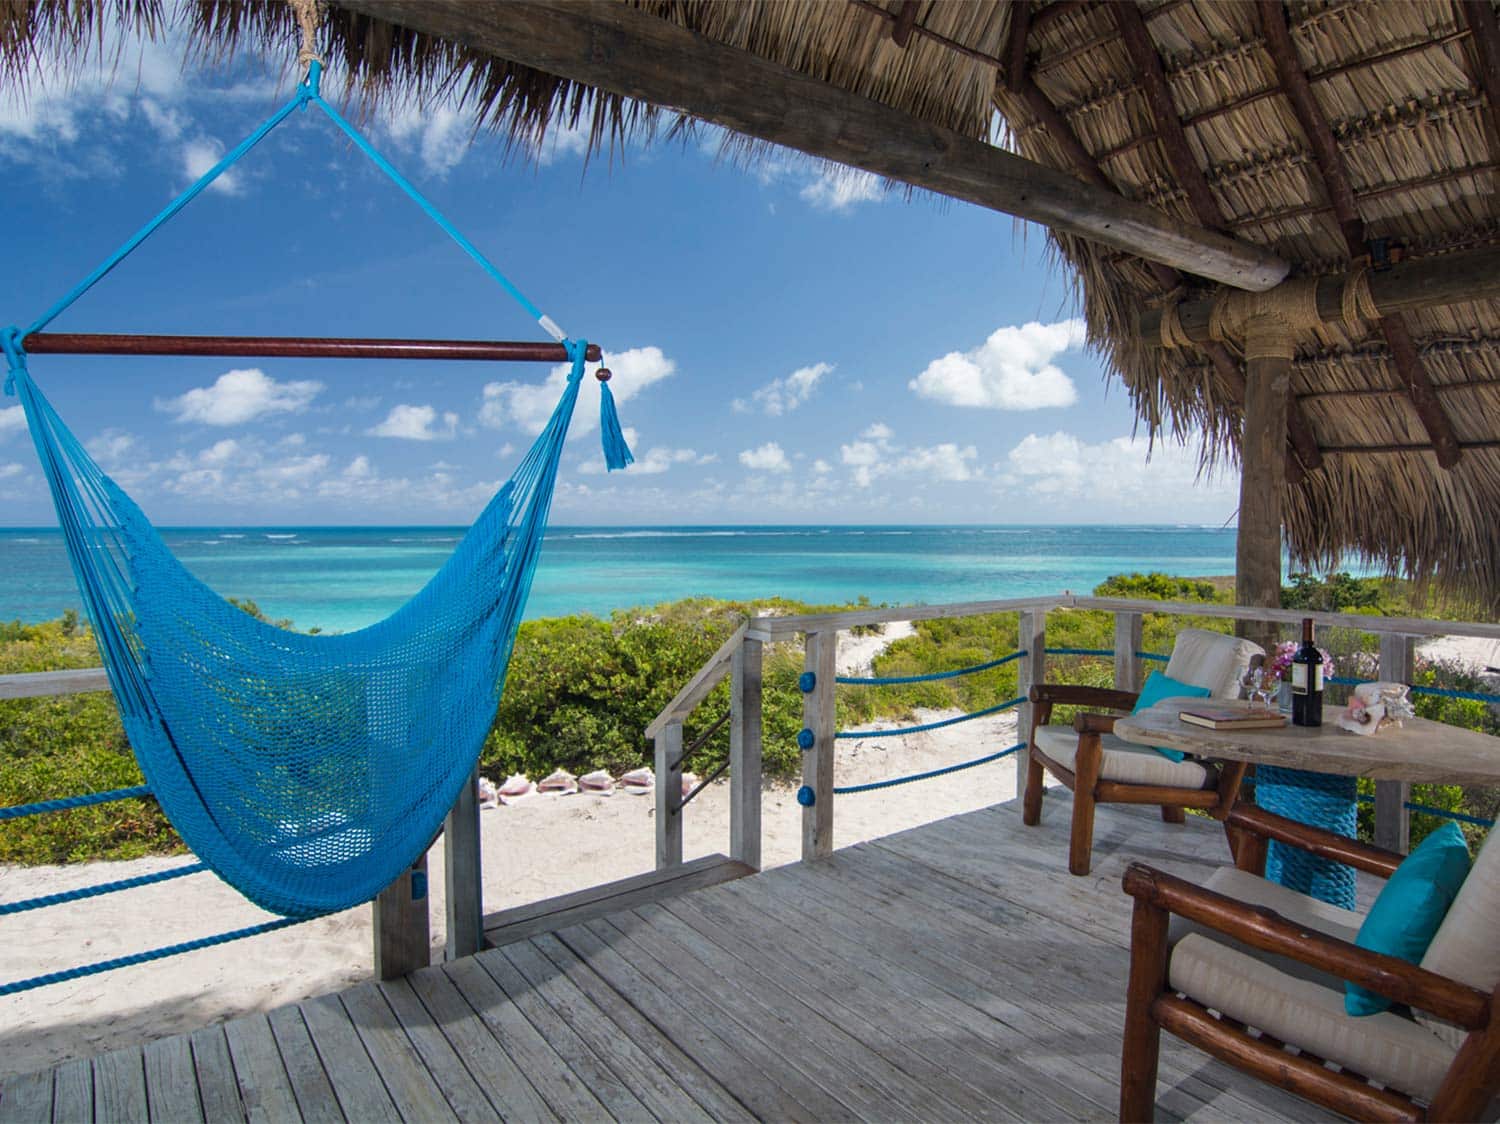 A hammock and lounge area overlooking a beach view at the Anegada Beach Club.